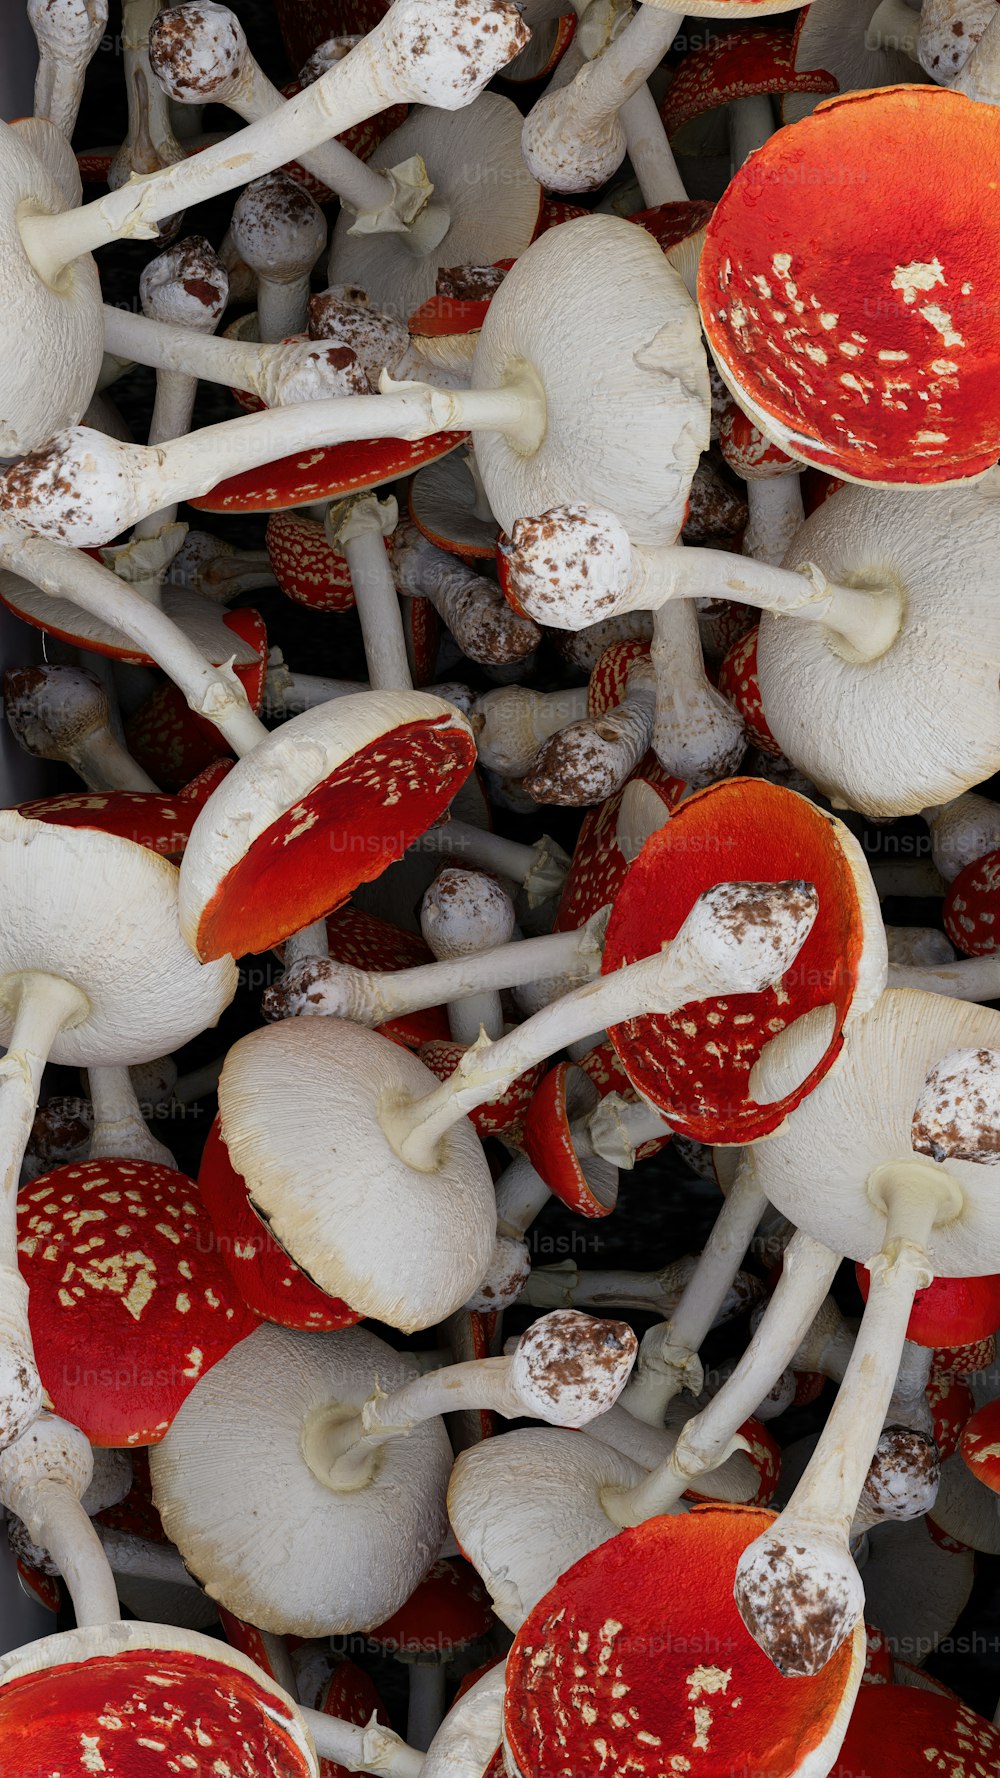 a bunch of mushrooms that are red and white